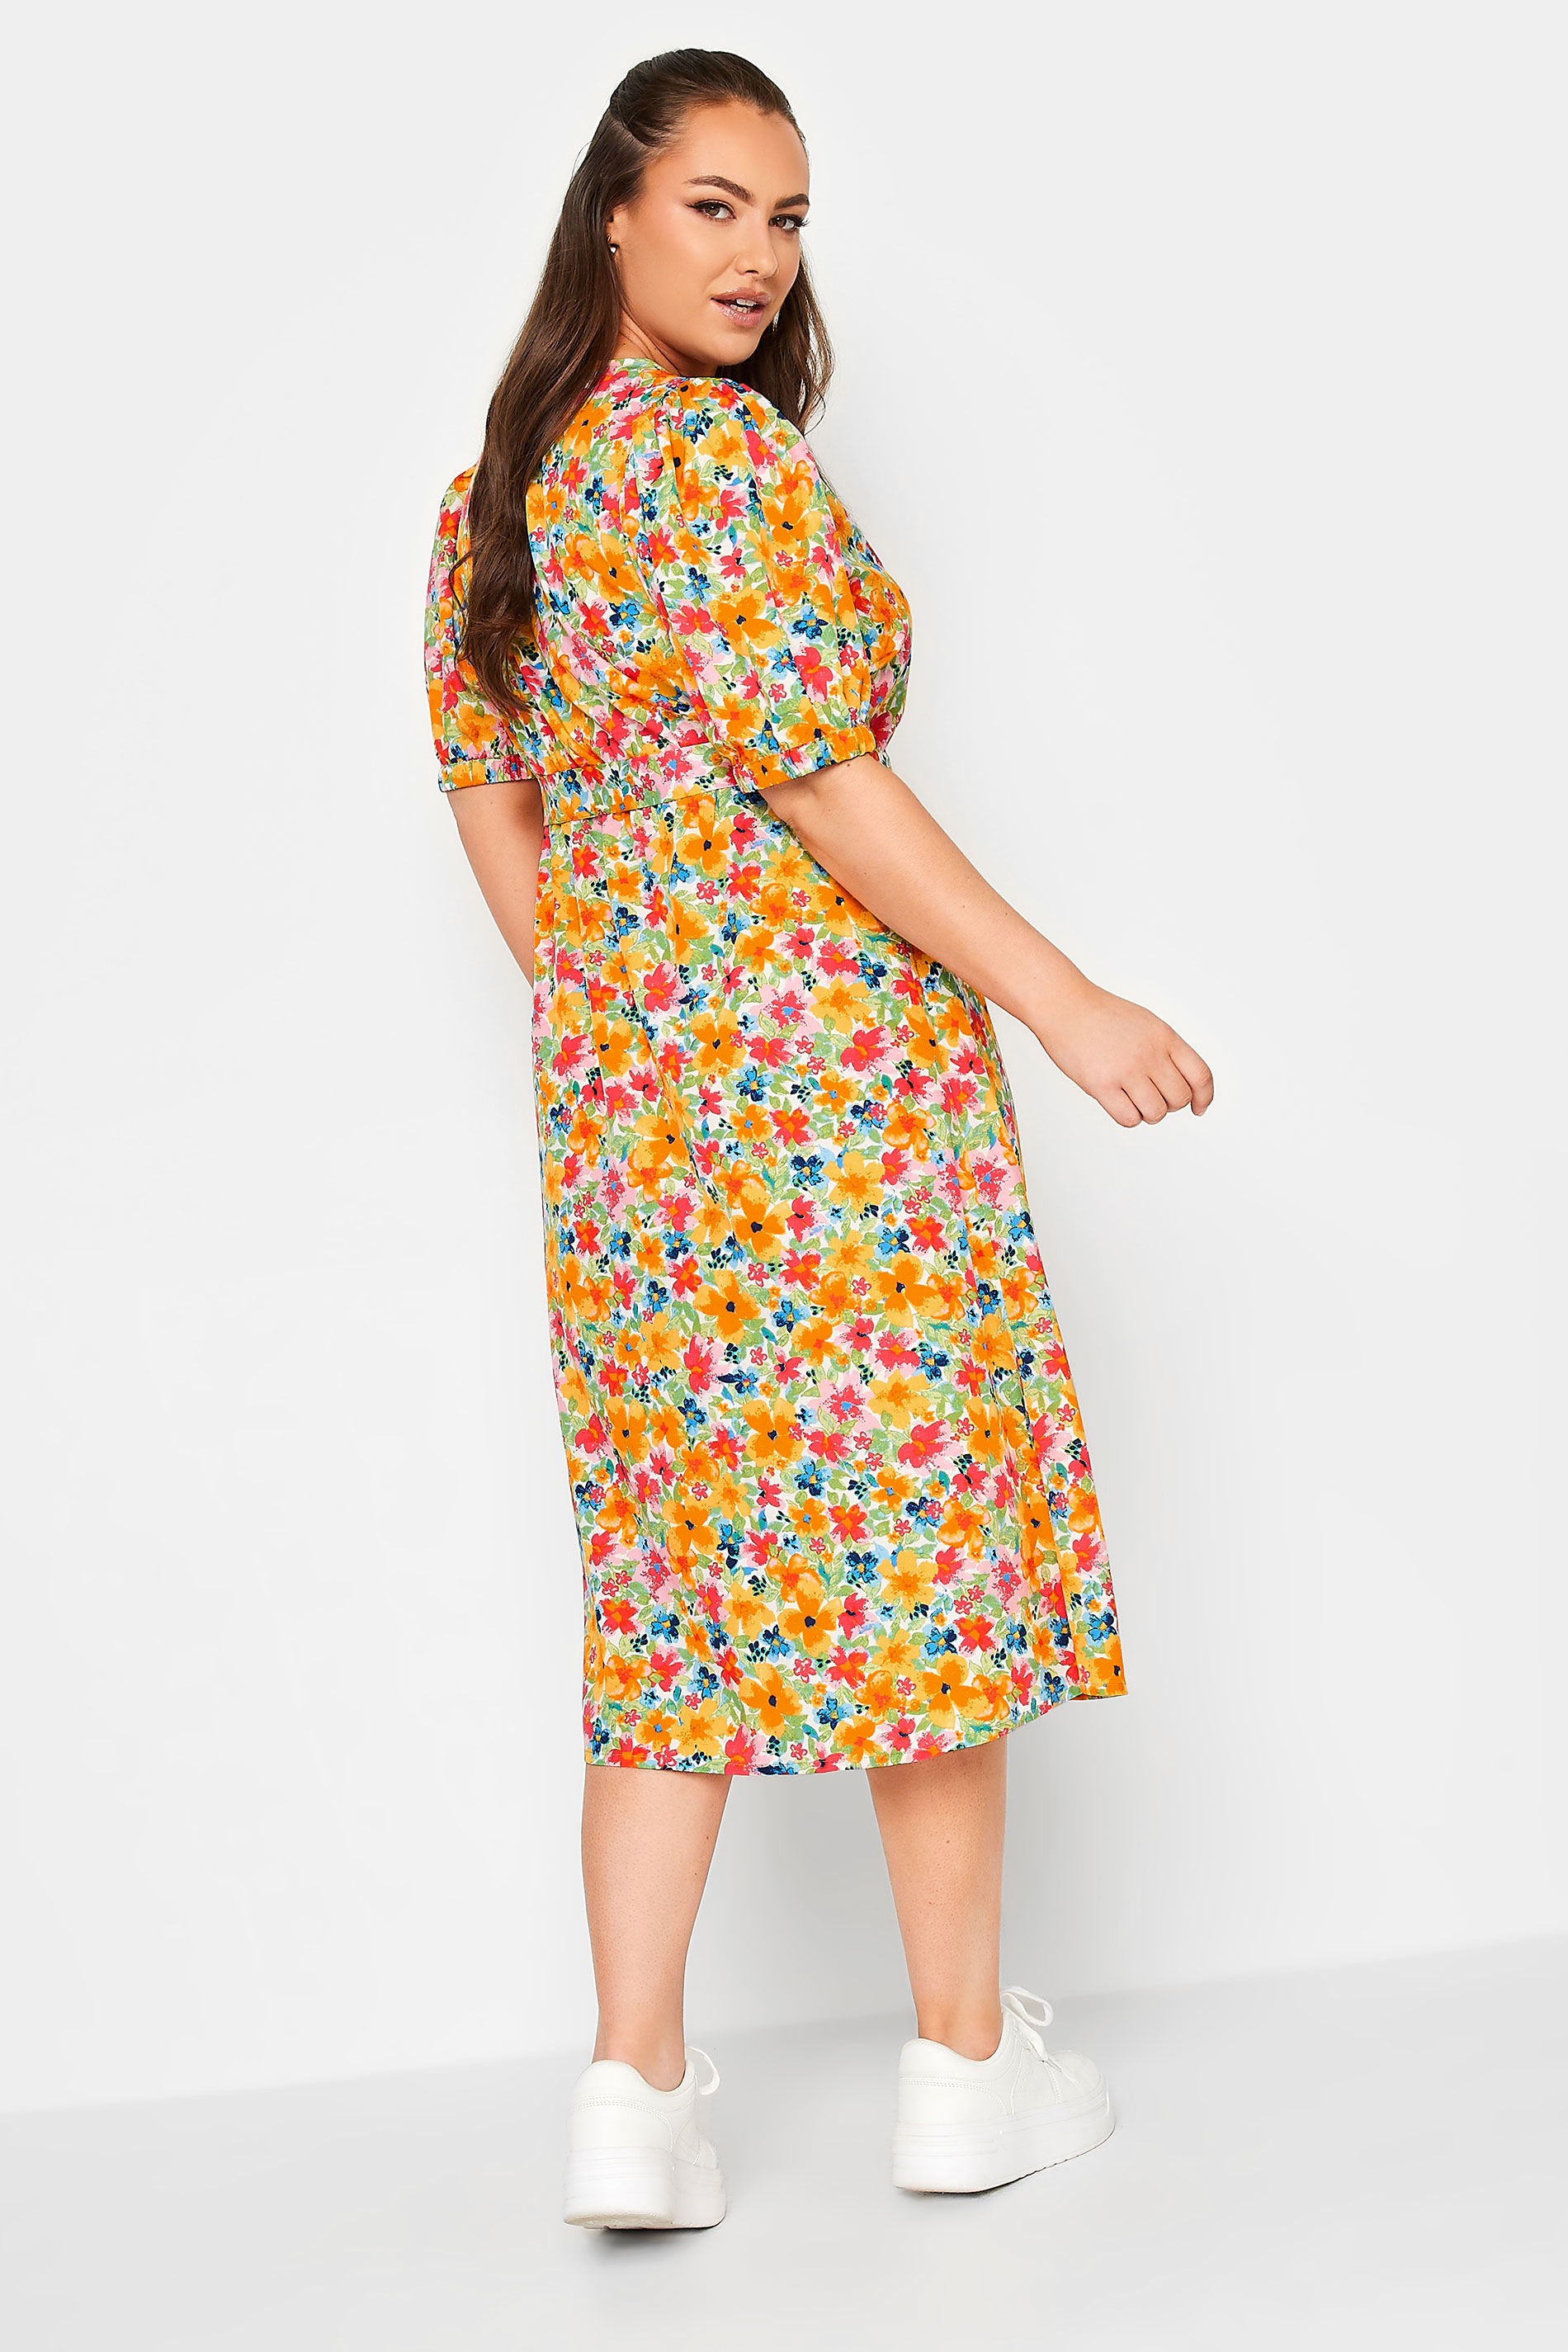 YOURS Curve Orange Sweetheart Neckline Floral Print Tea Dress | Yours Clothing 3